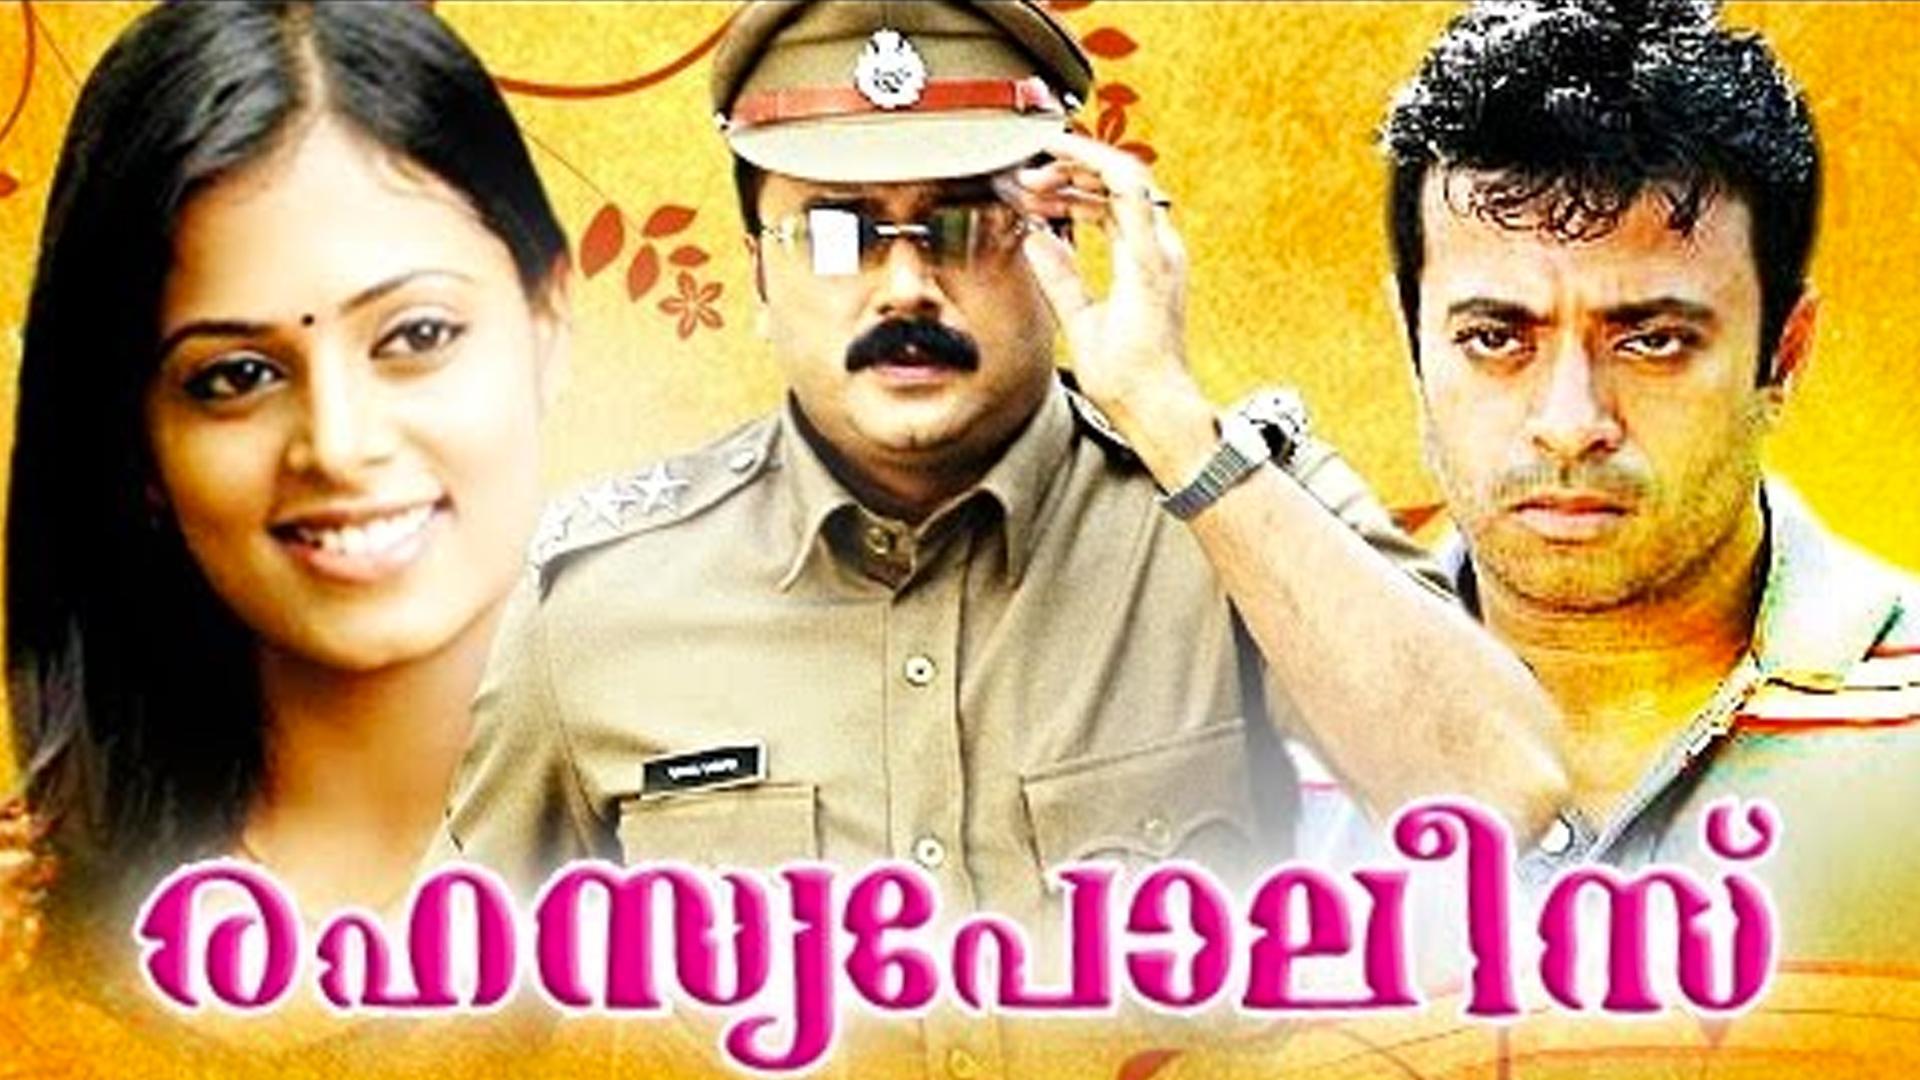 deana andrew recommends Mumbai Police Movie Online